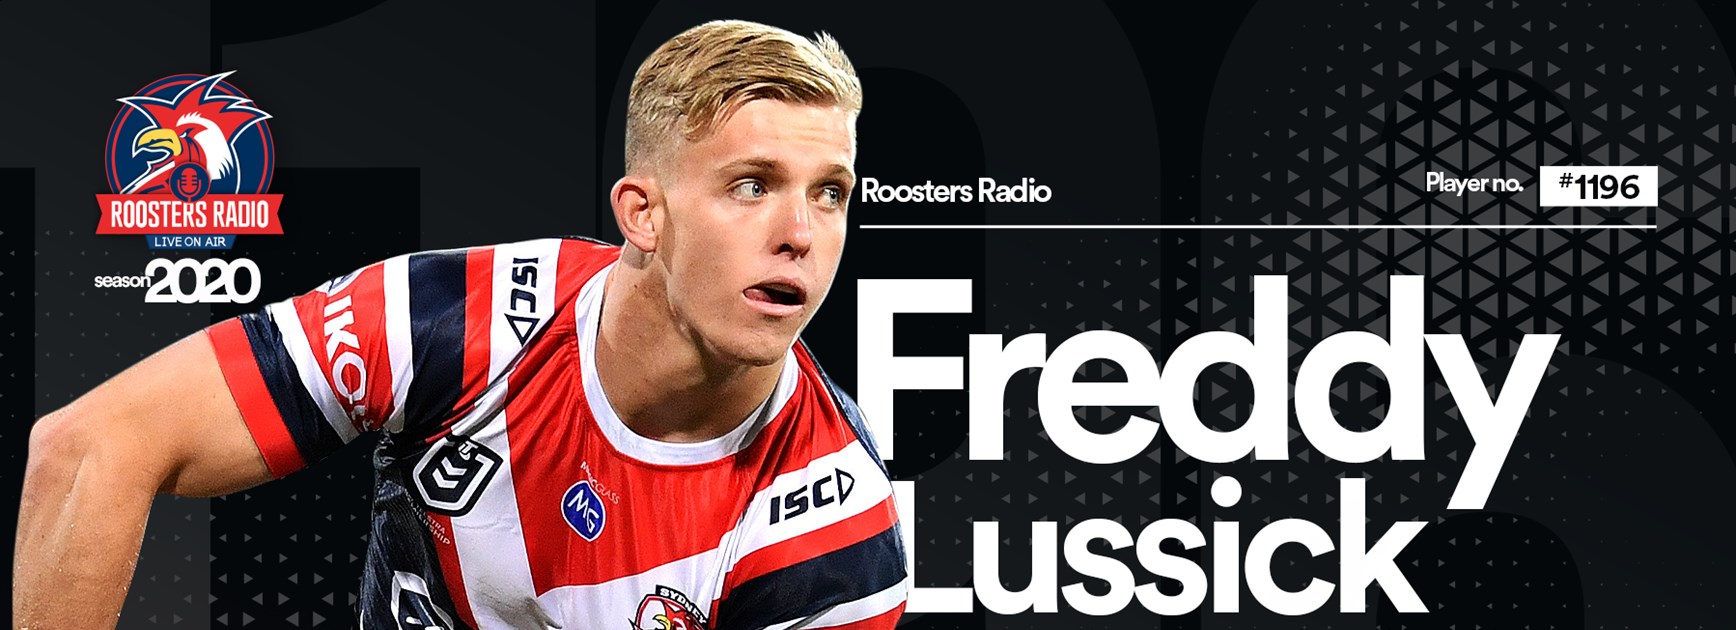 Roosters Radio | Freddy Lussick